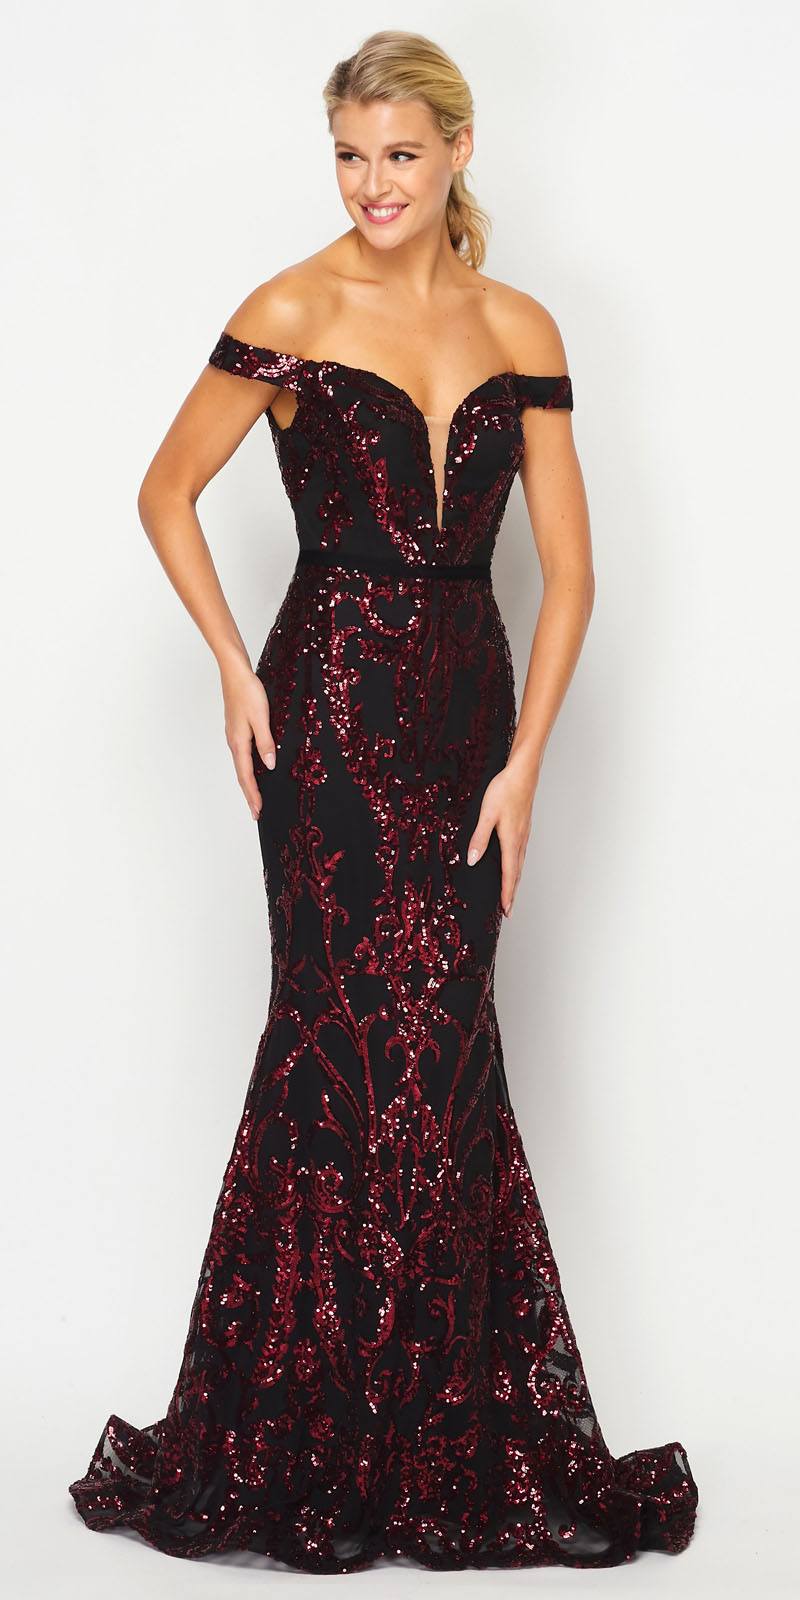 Prom Long Spaghetti Strap Sequins Formal Dress for $319.99 – The Dress  Outlet